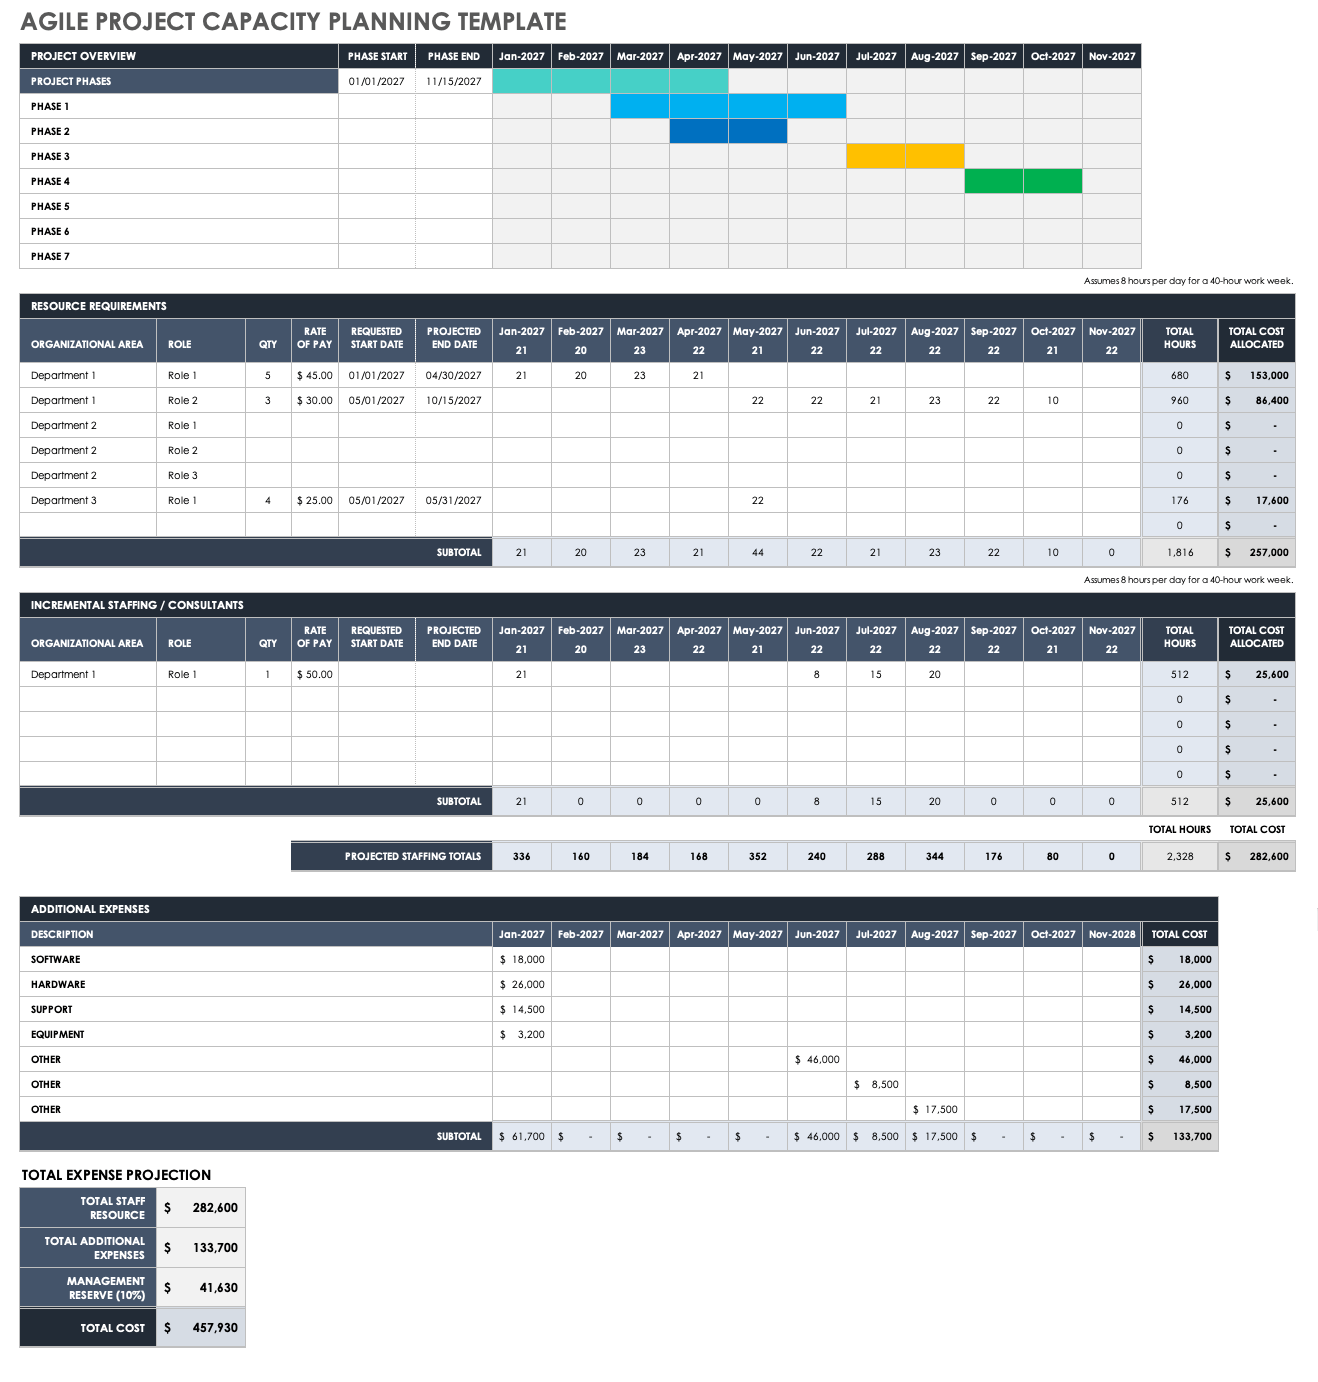 Agile Project Capacity Planning Template